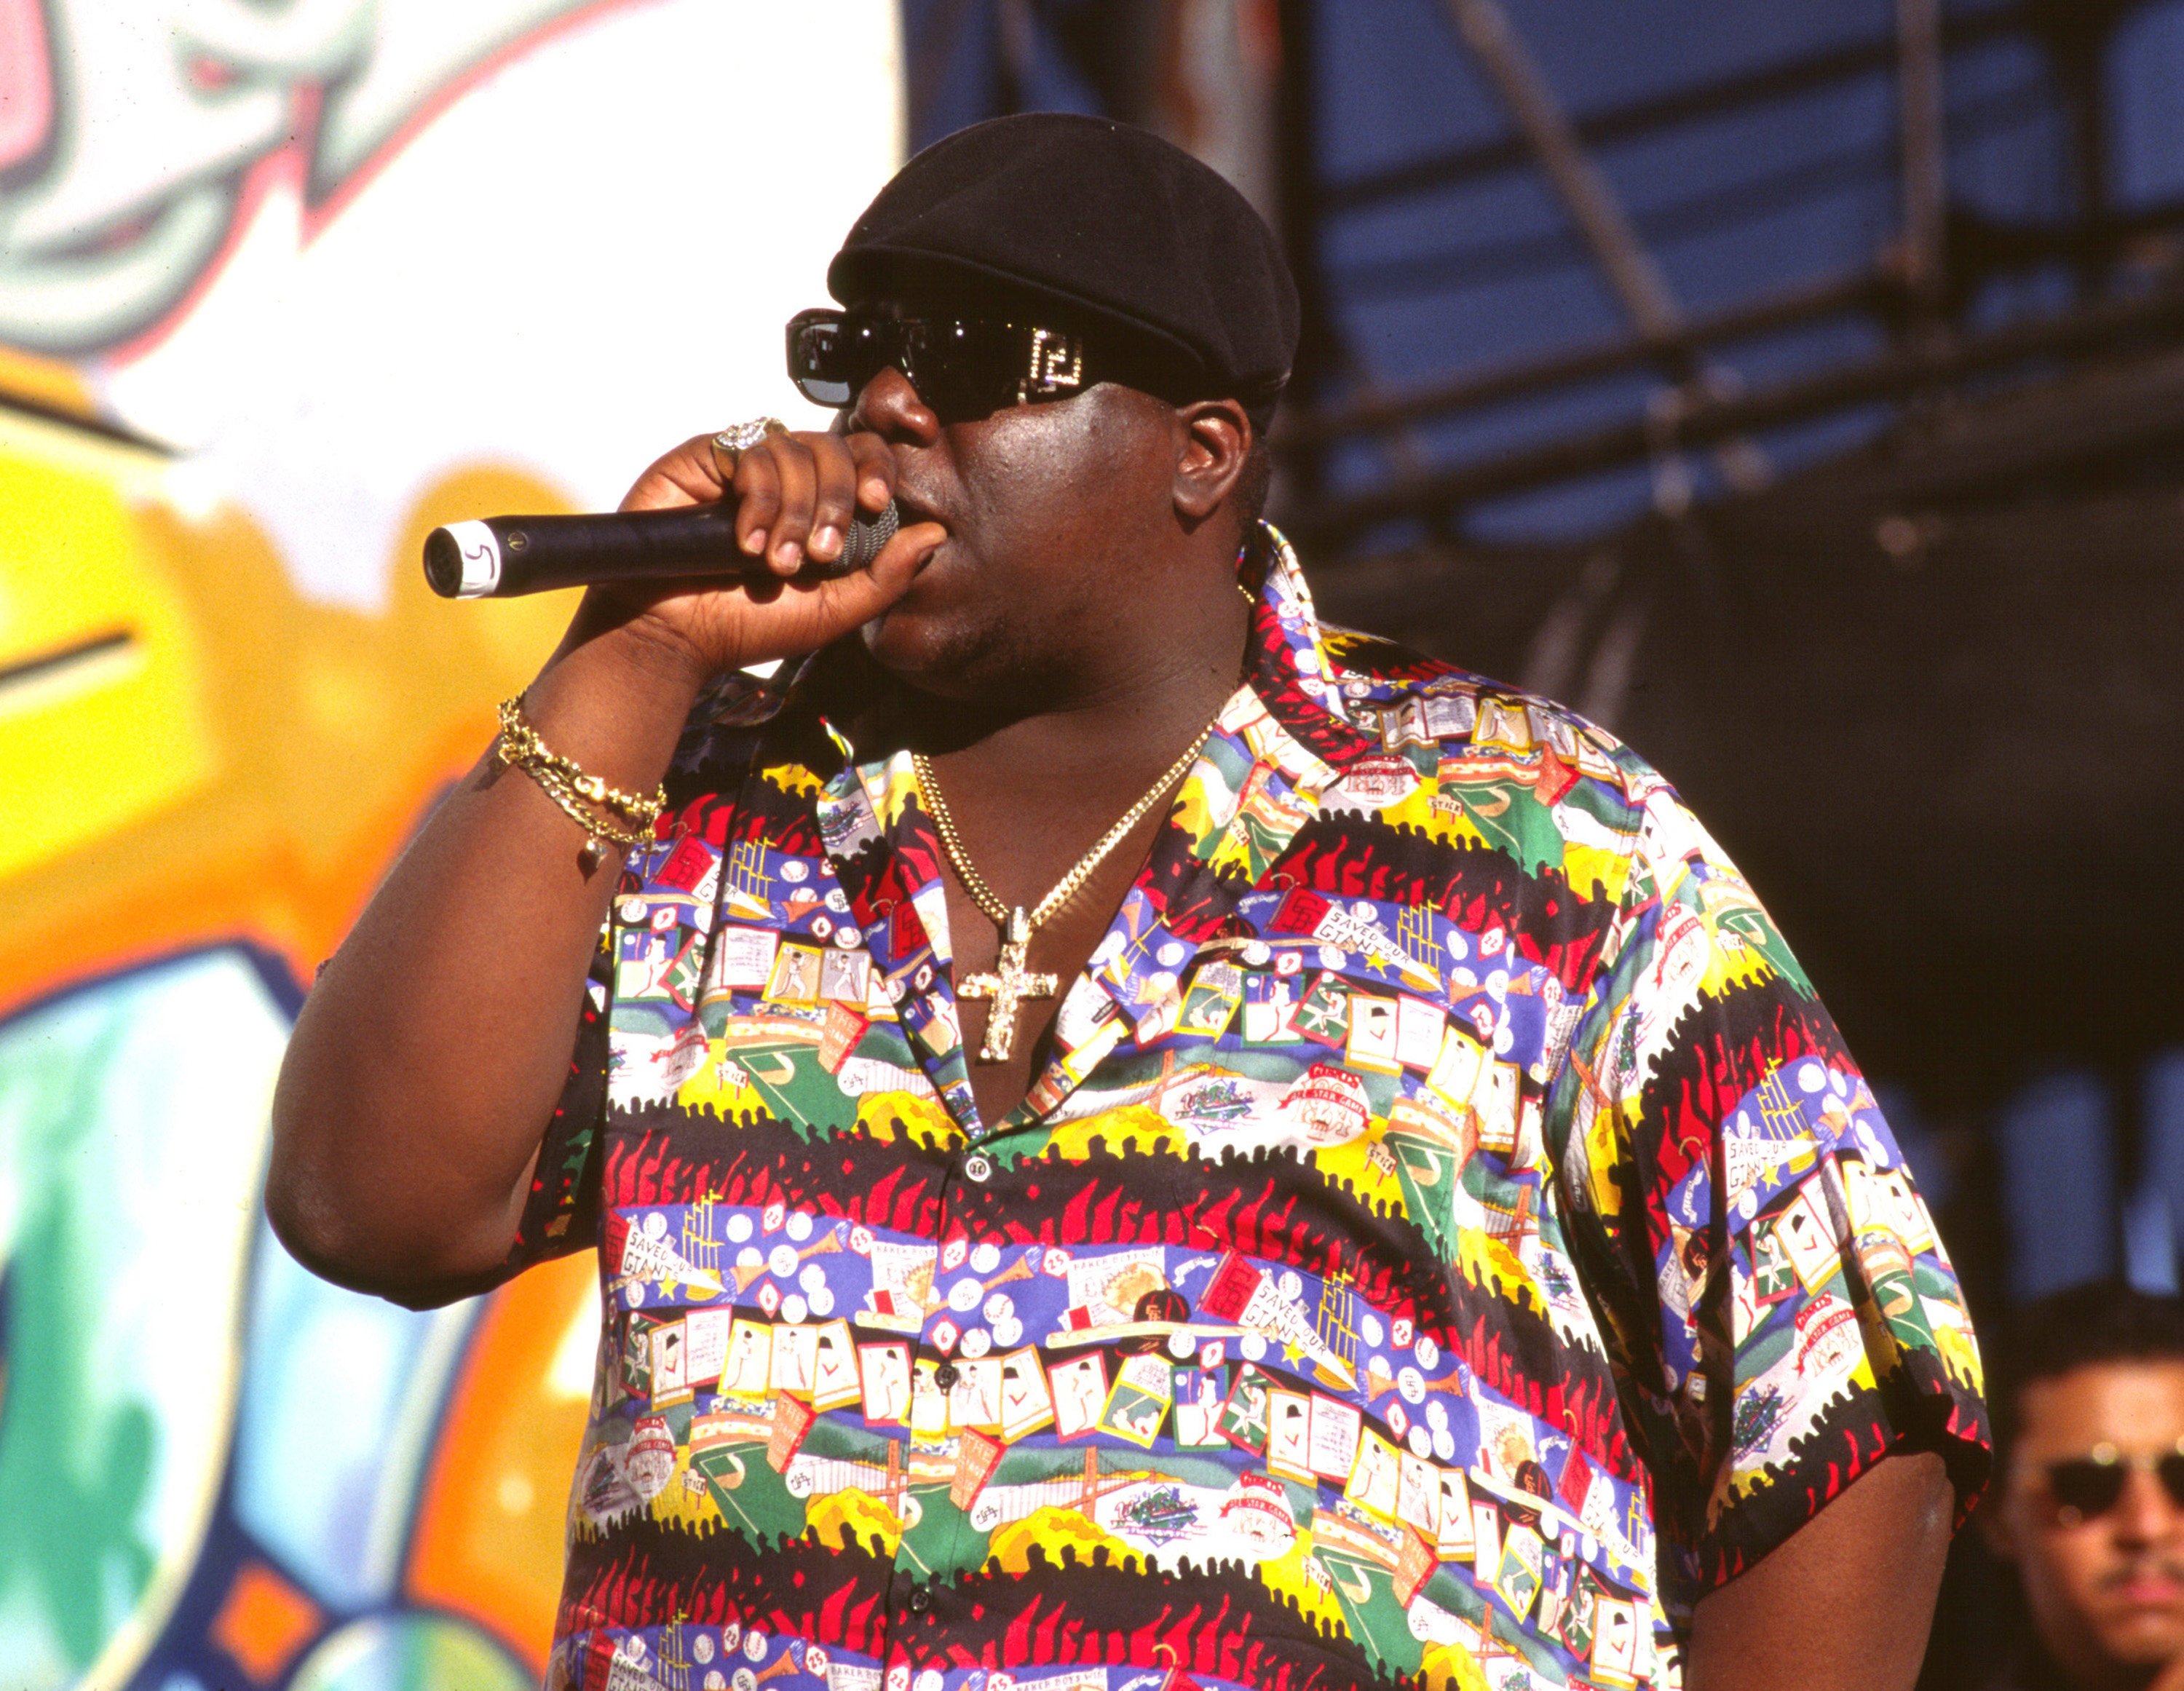 The Notorious B.I.G., who used to leave special voicemails for his friends, rapping into a microphone